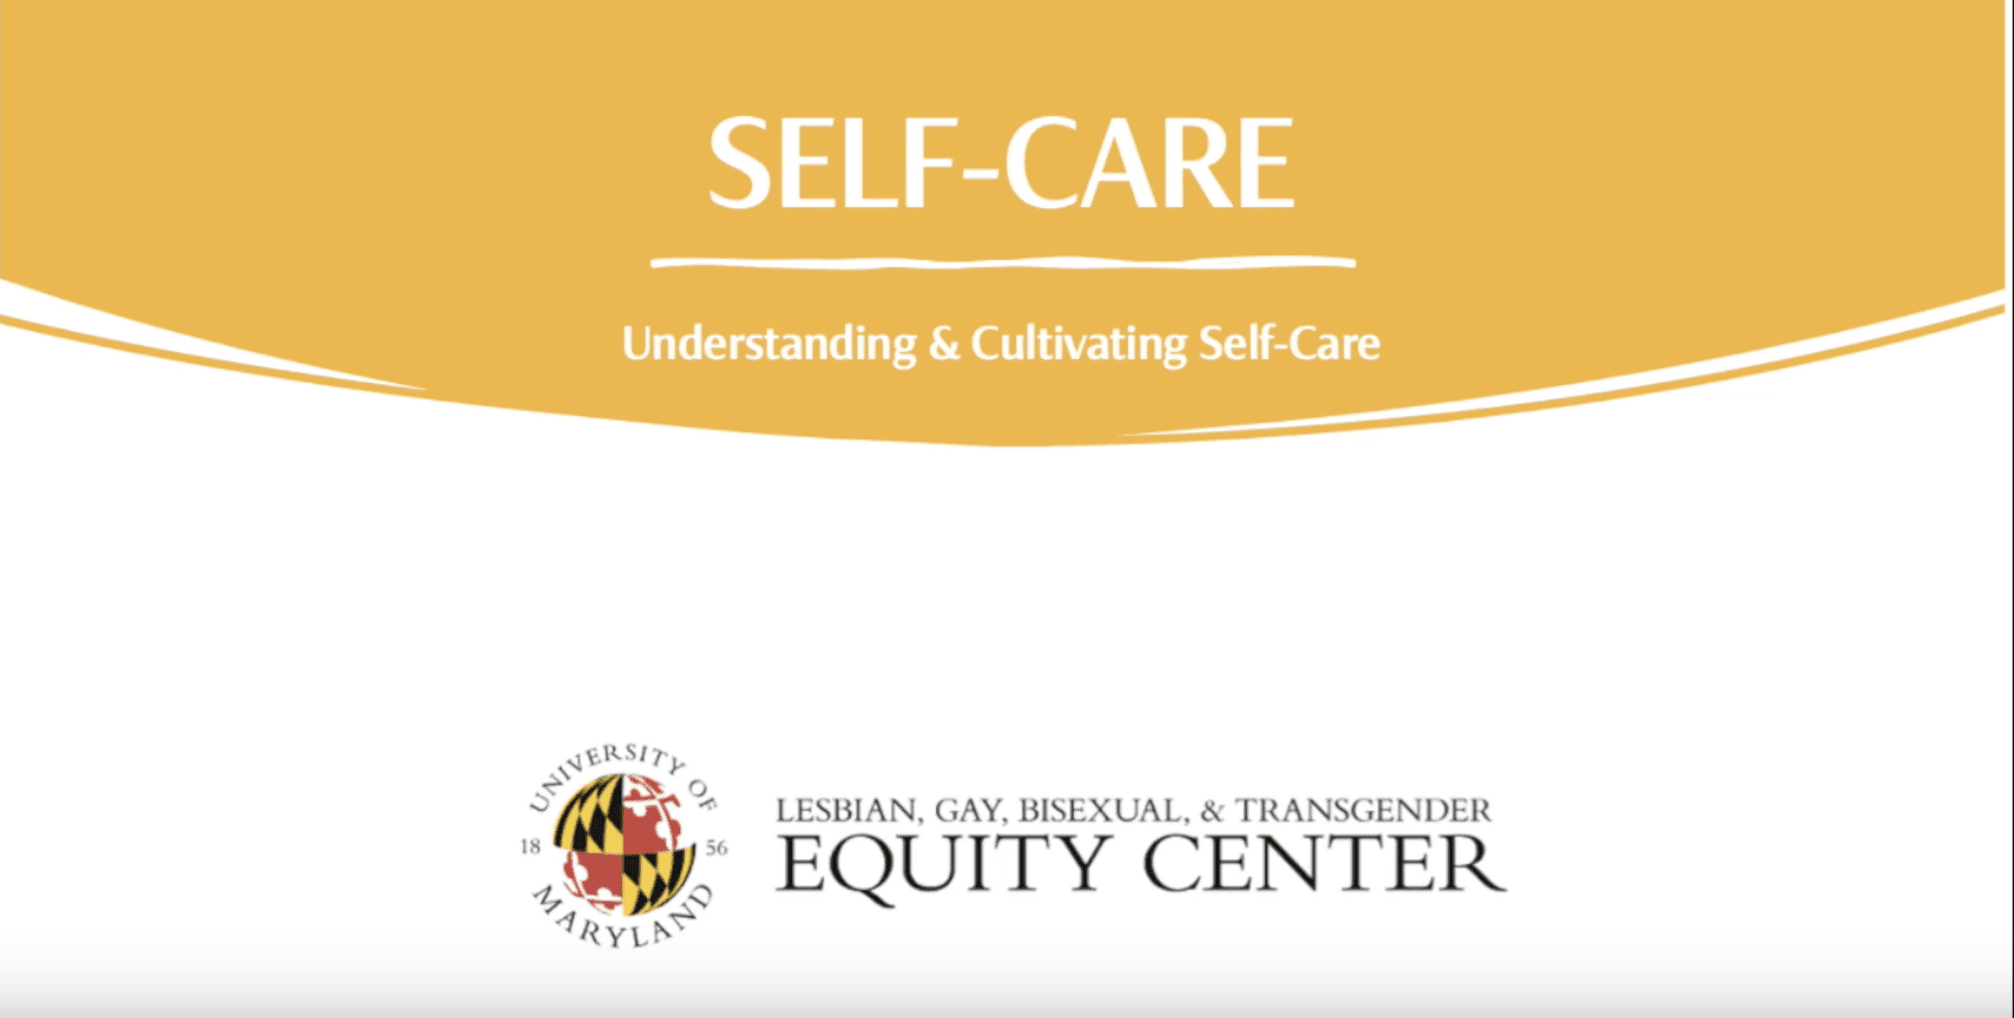 Thumbnail with Equity Center logo and the title 'self-care: understanding and cultivating self-care'